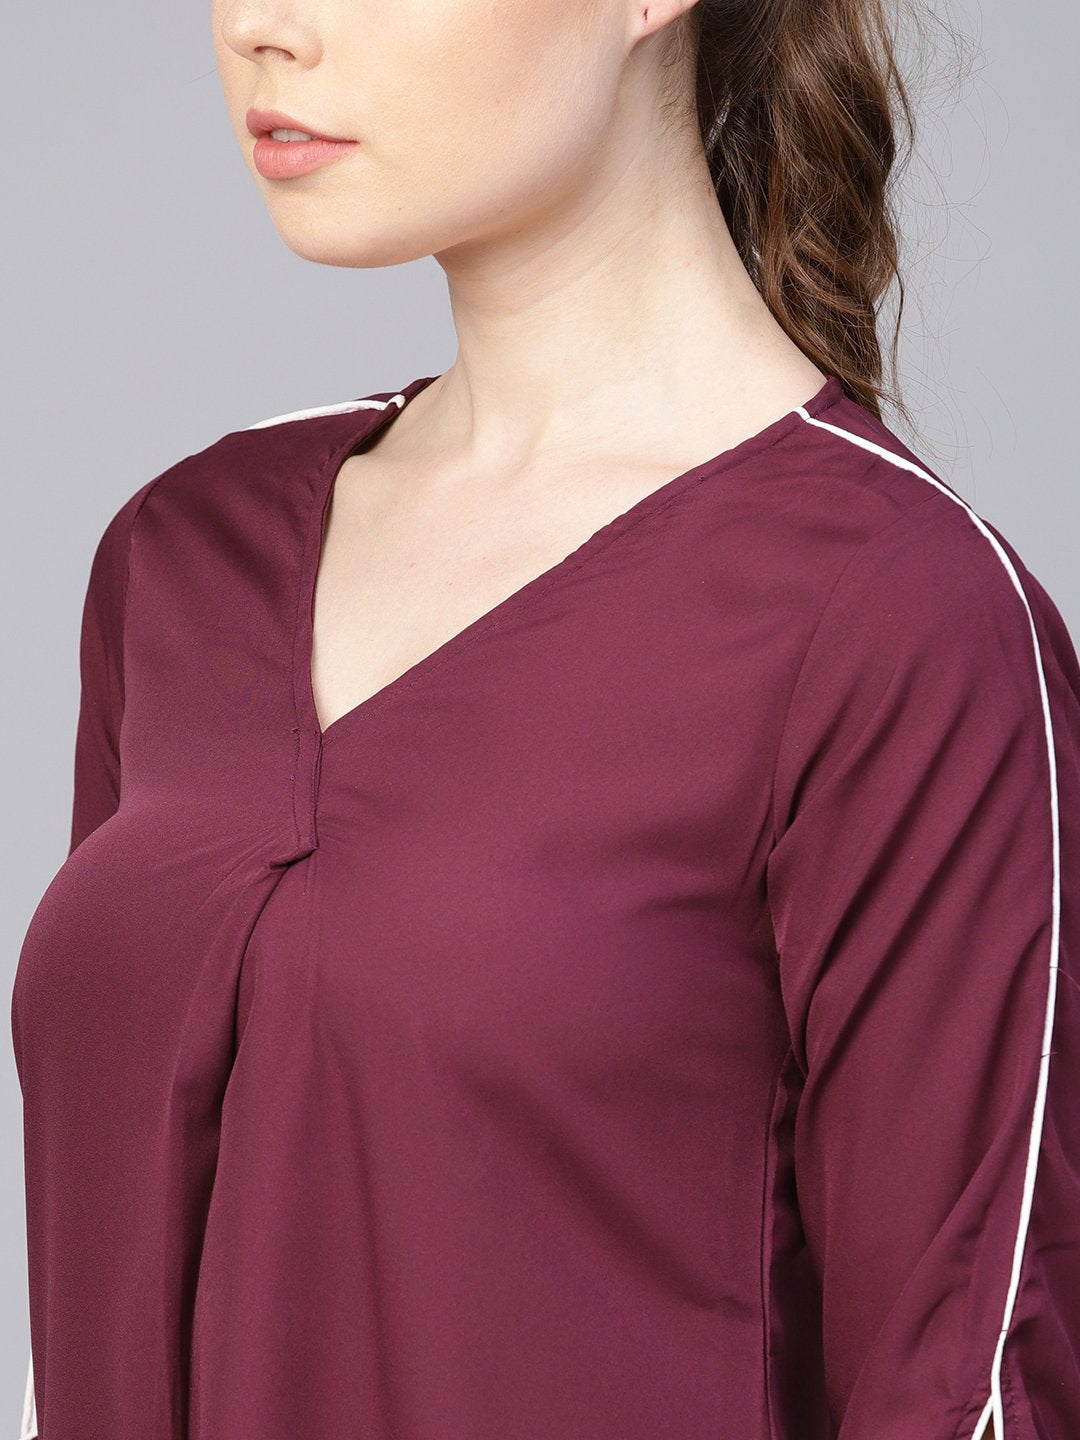 Women's Burgundy A-Line Dress With Knot Style Sleeves - Nayo Clothing